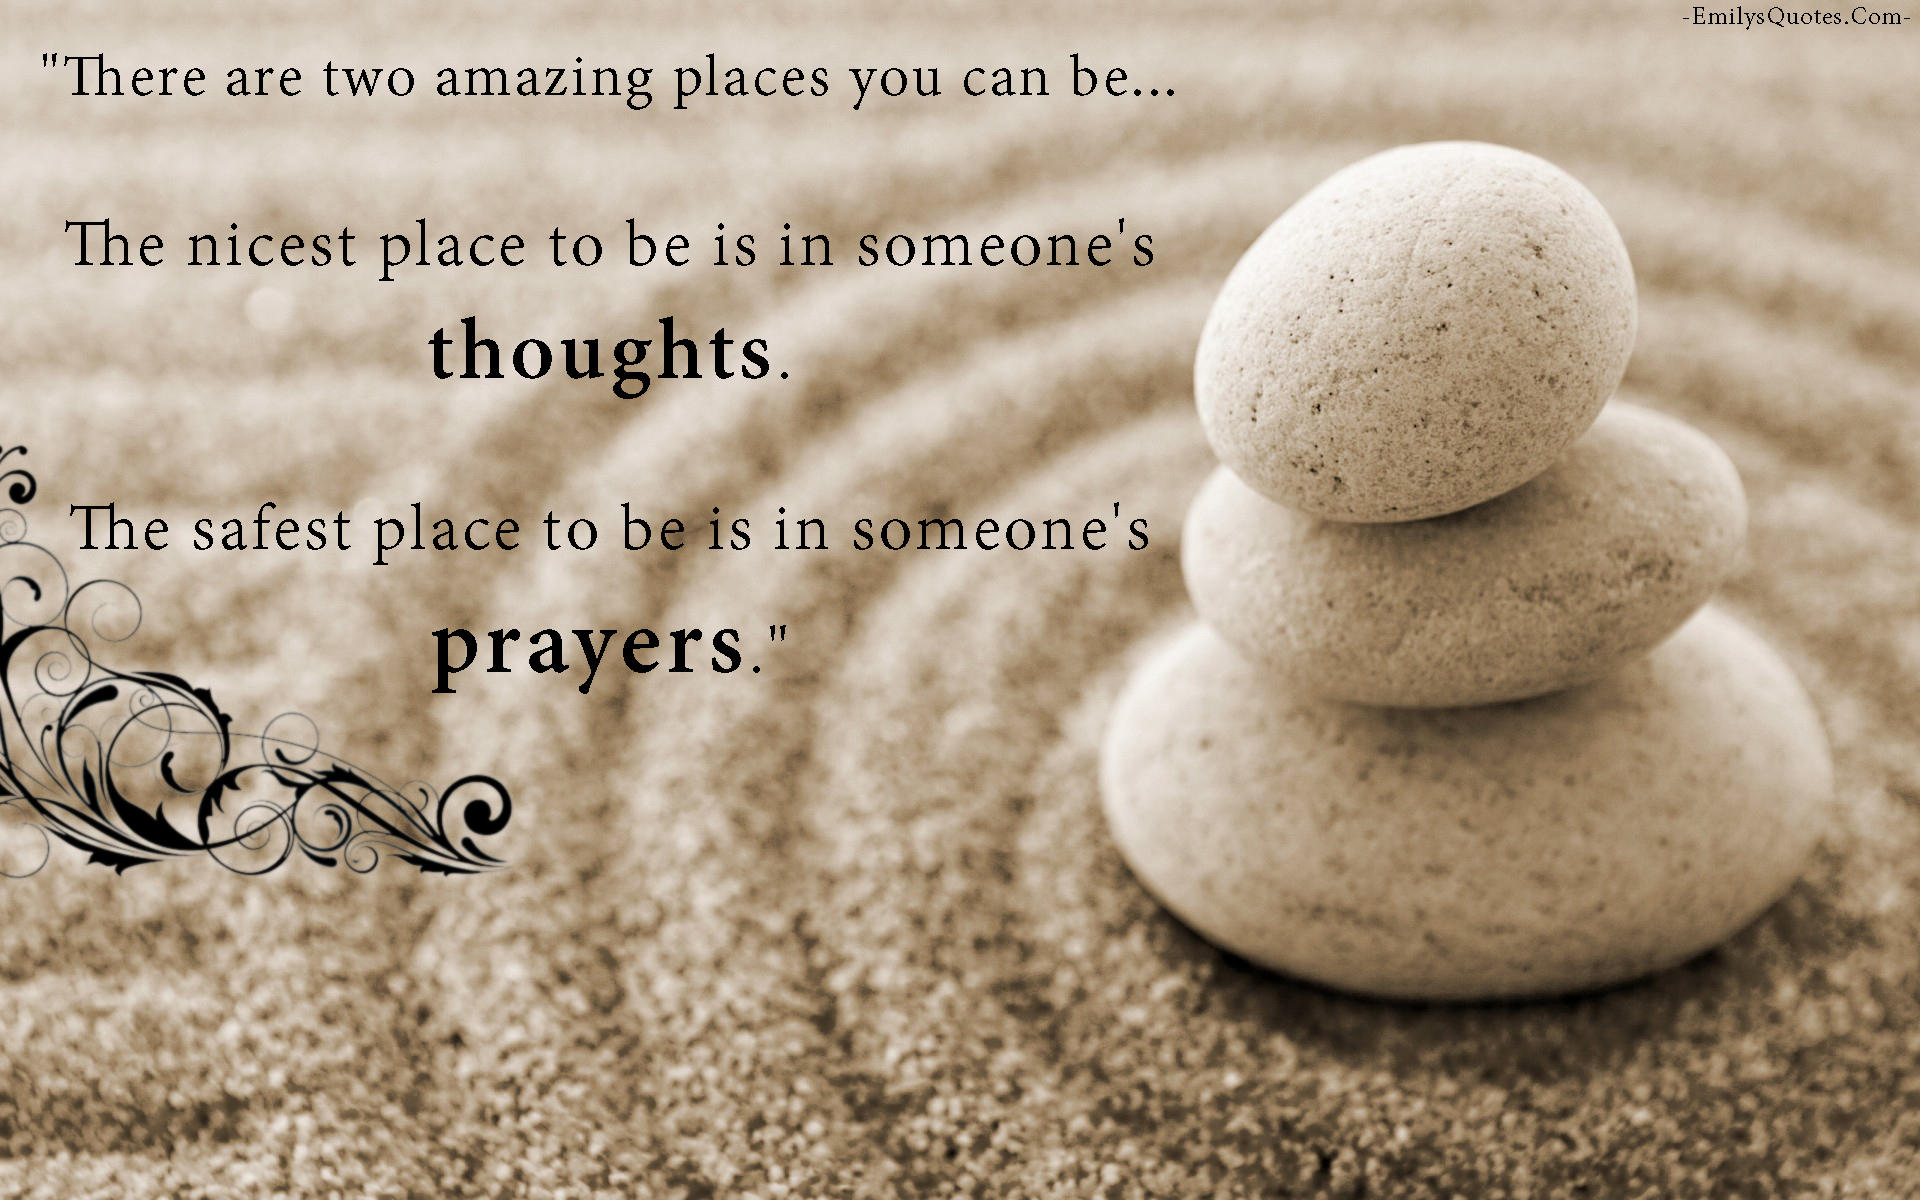 There are two amazing places you can be… The nicest place to be is in someone’s thoughts. The safest place to be is in someone’s prayers